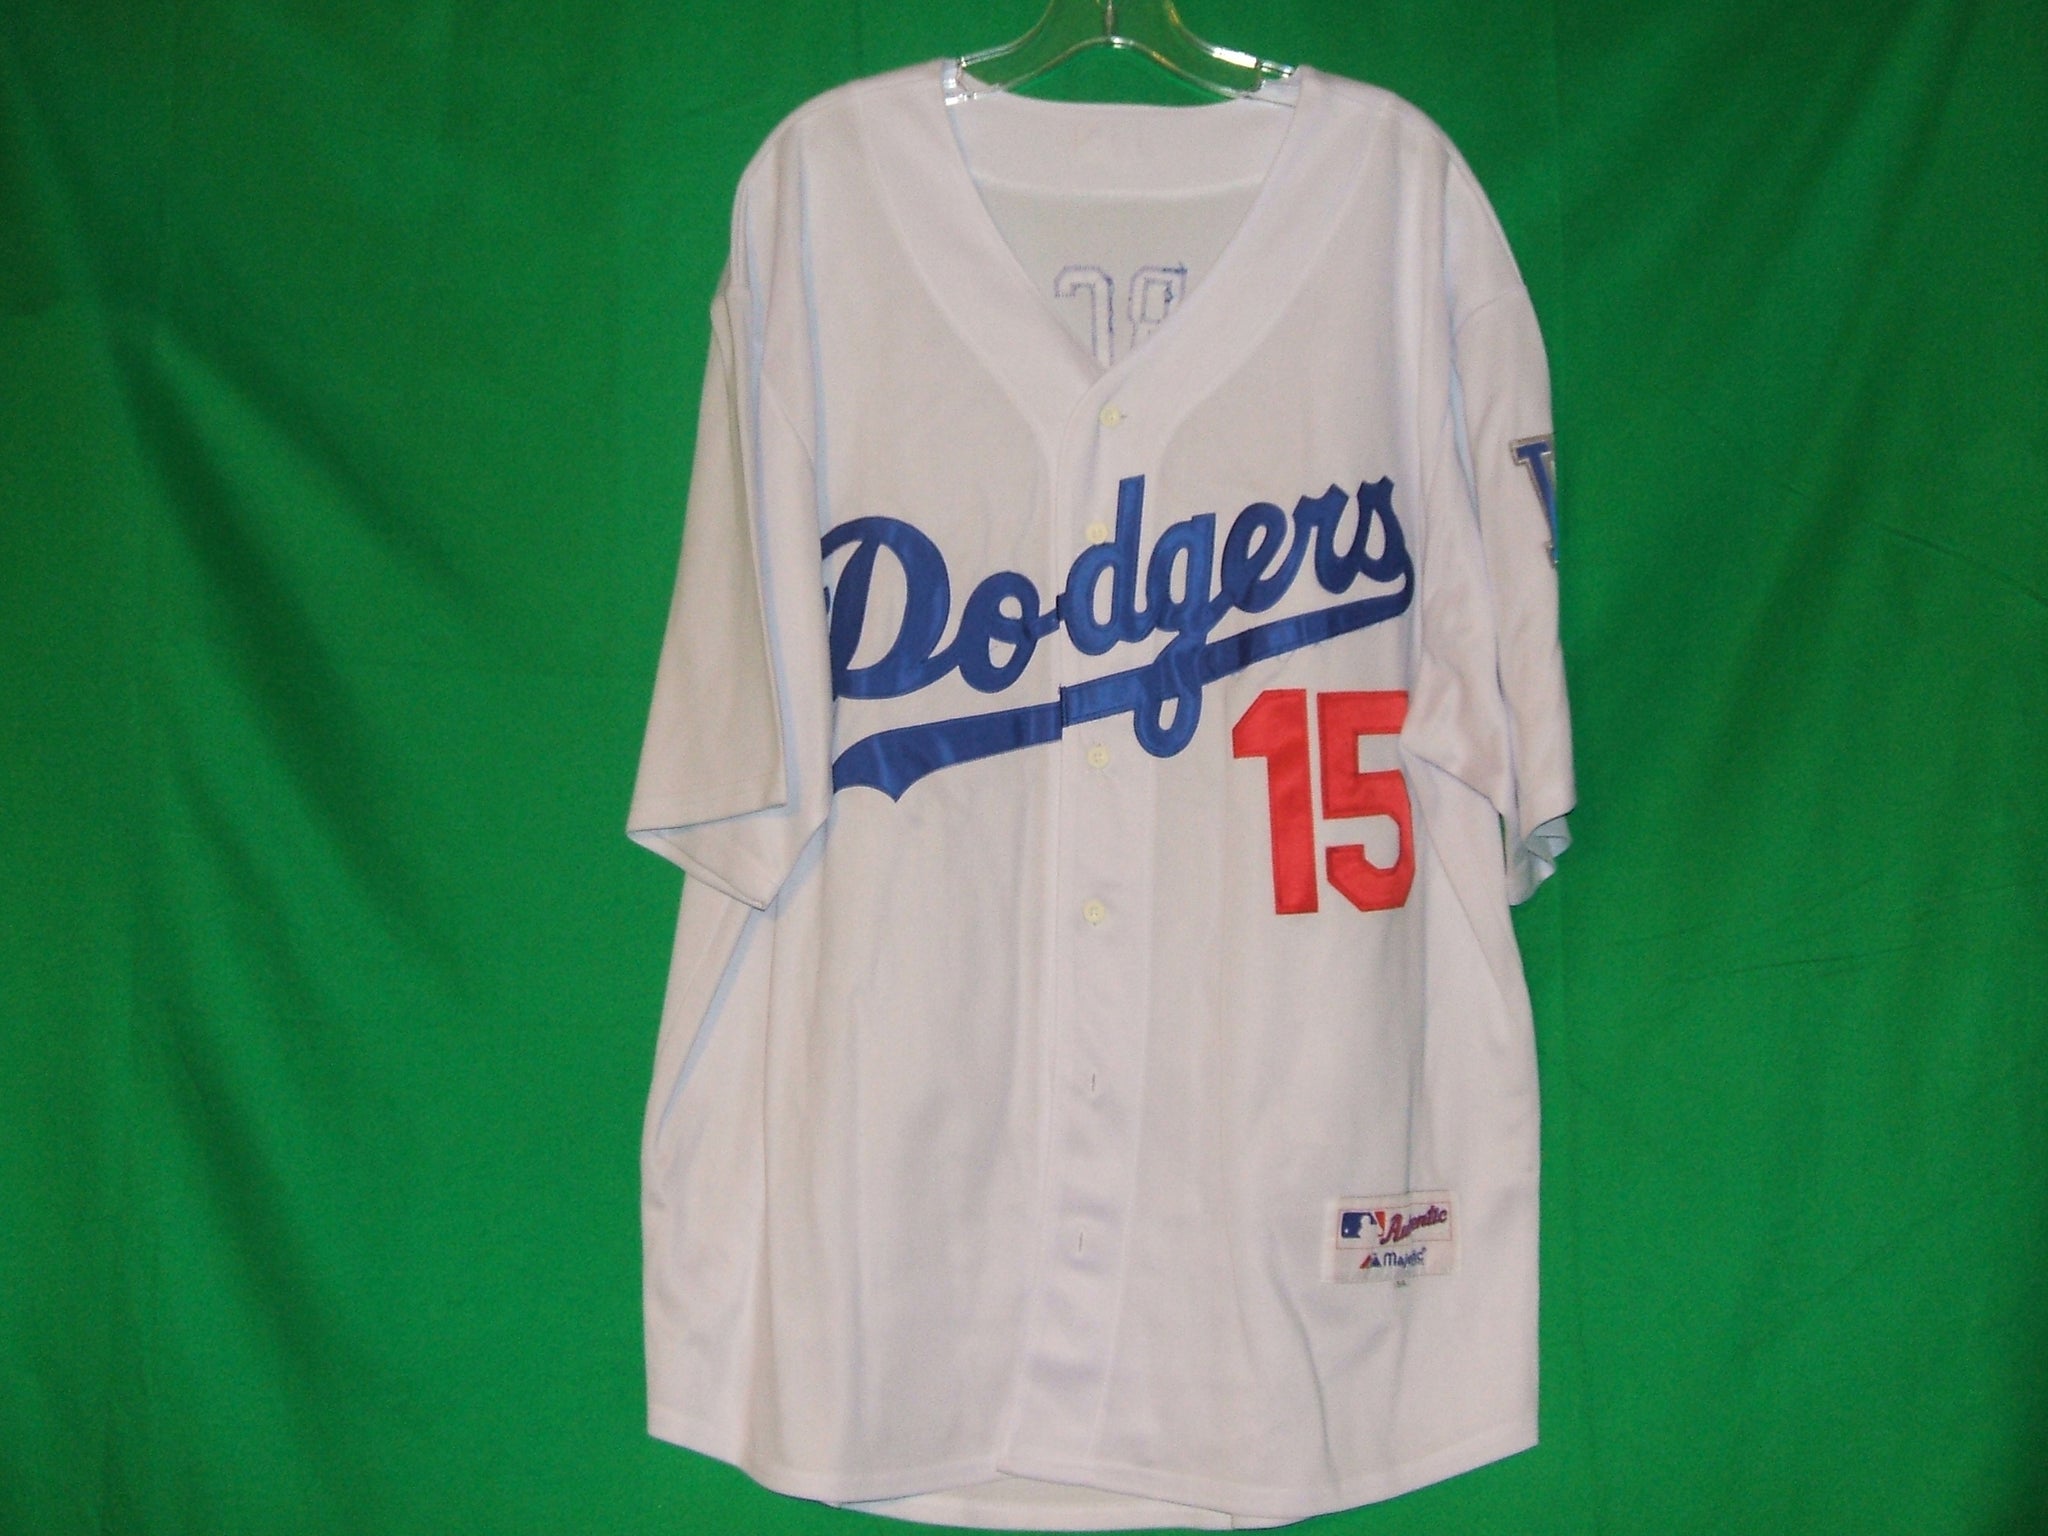 dodgers white jersey